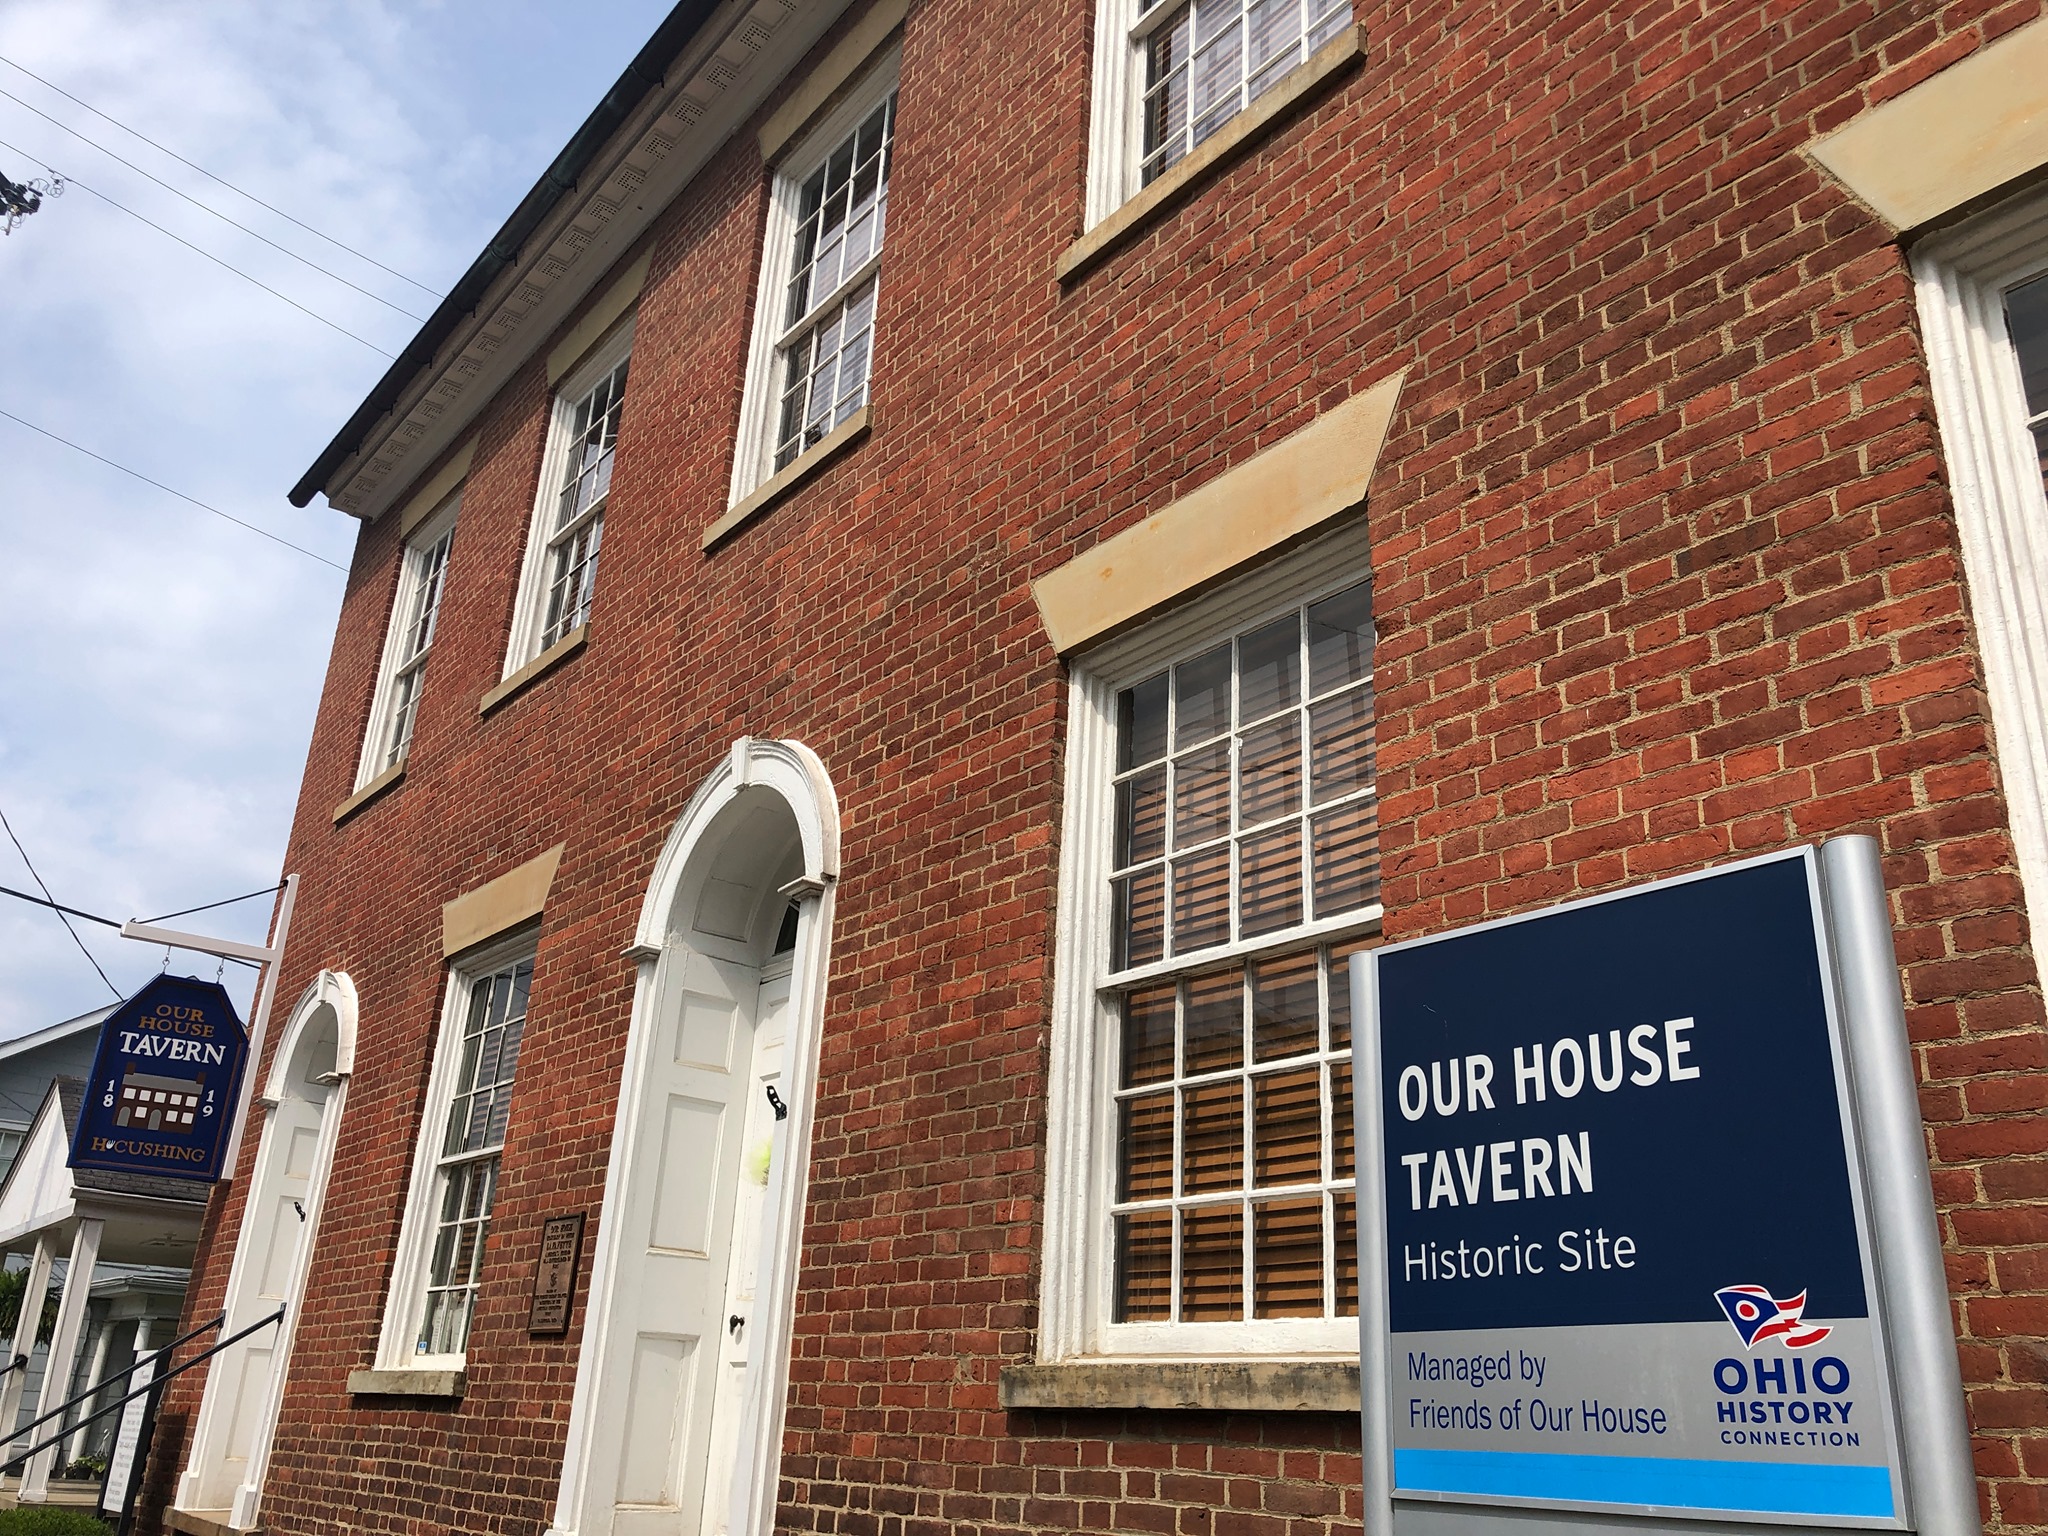 Our House Tavern Museum